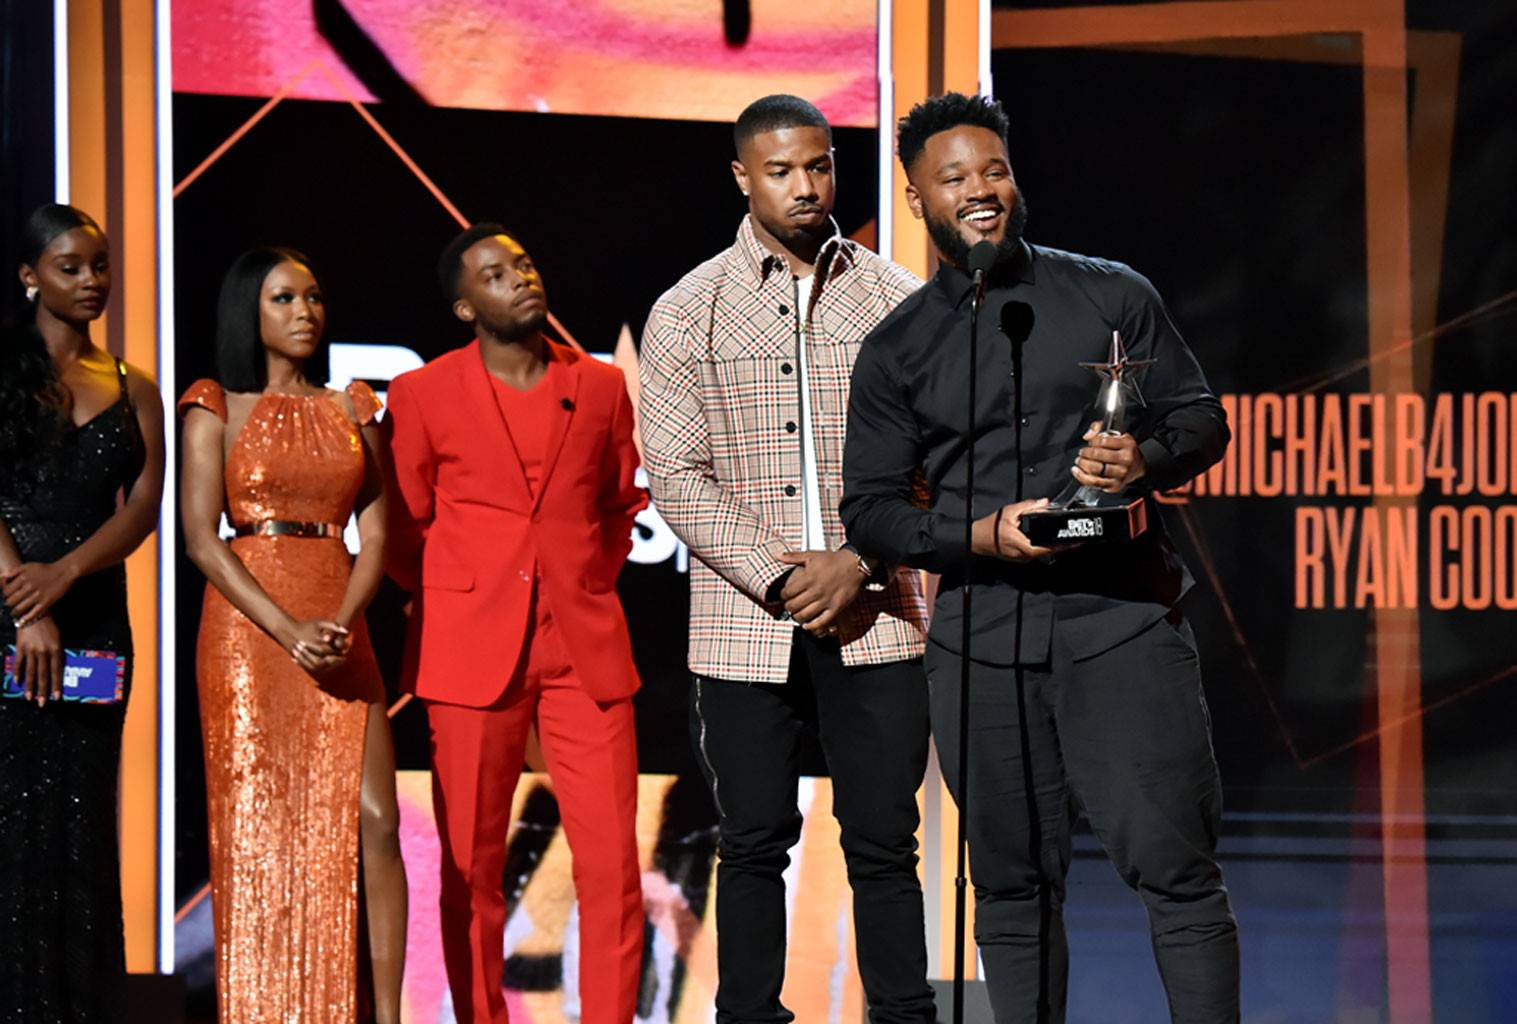 BET Awards 2018 Winners: The Complete List